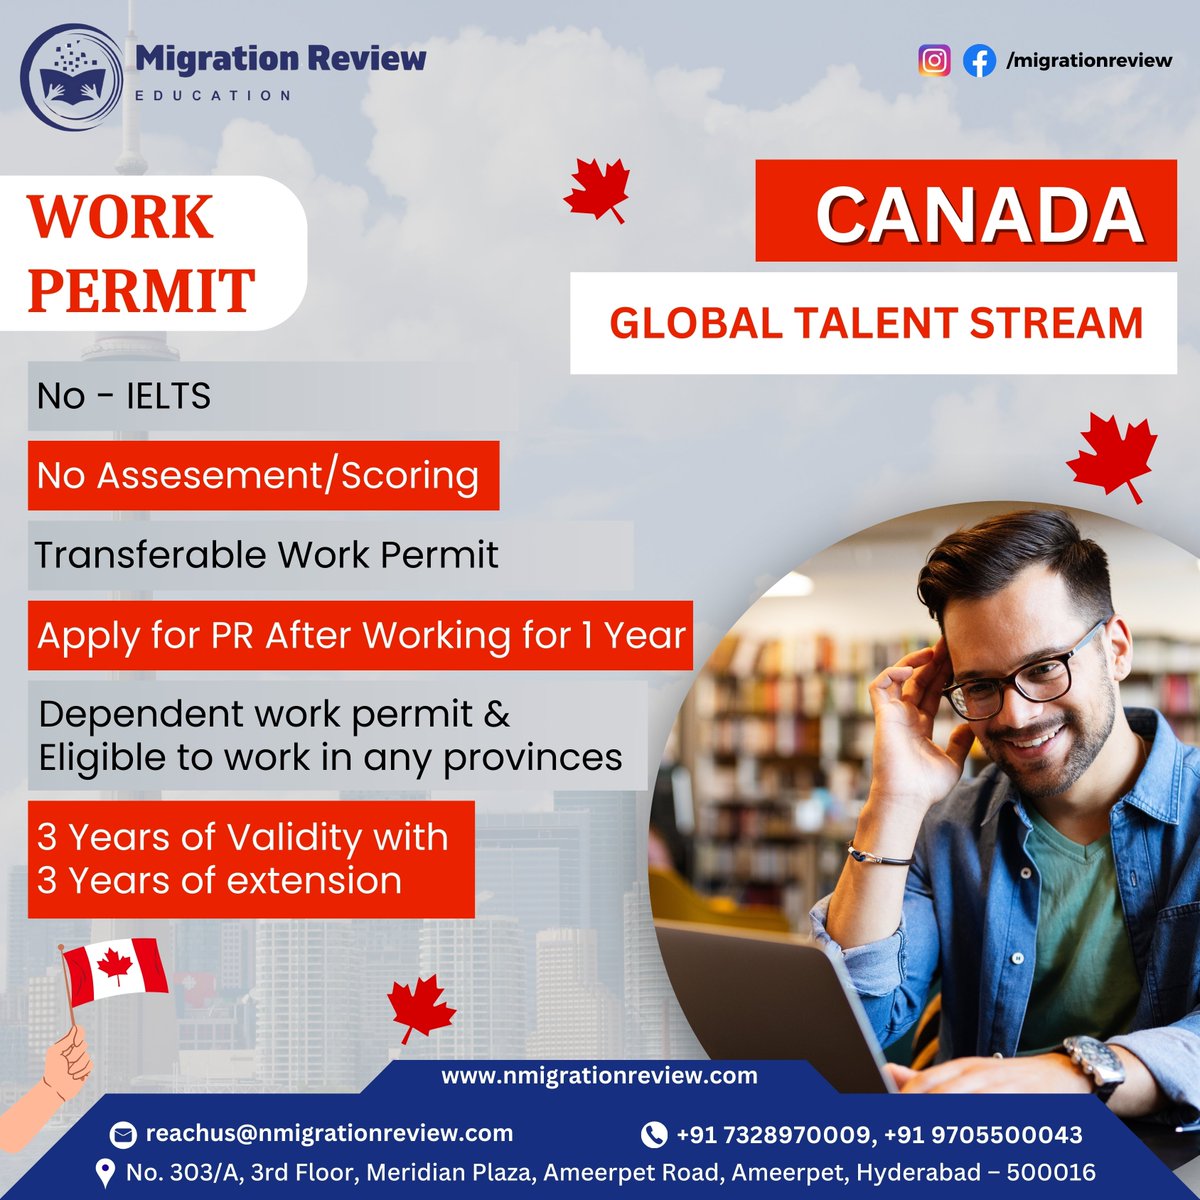 Thinking about applying for the Canada Global Talent Stream Work Permit? Read our migration review to make an informed decision! 🌎✈️

.

#GlobalTalentStream #WorkInCanada #MigrationReview #CanadianImmigration #DreamJob